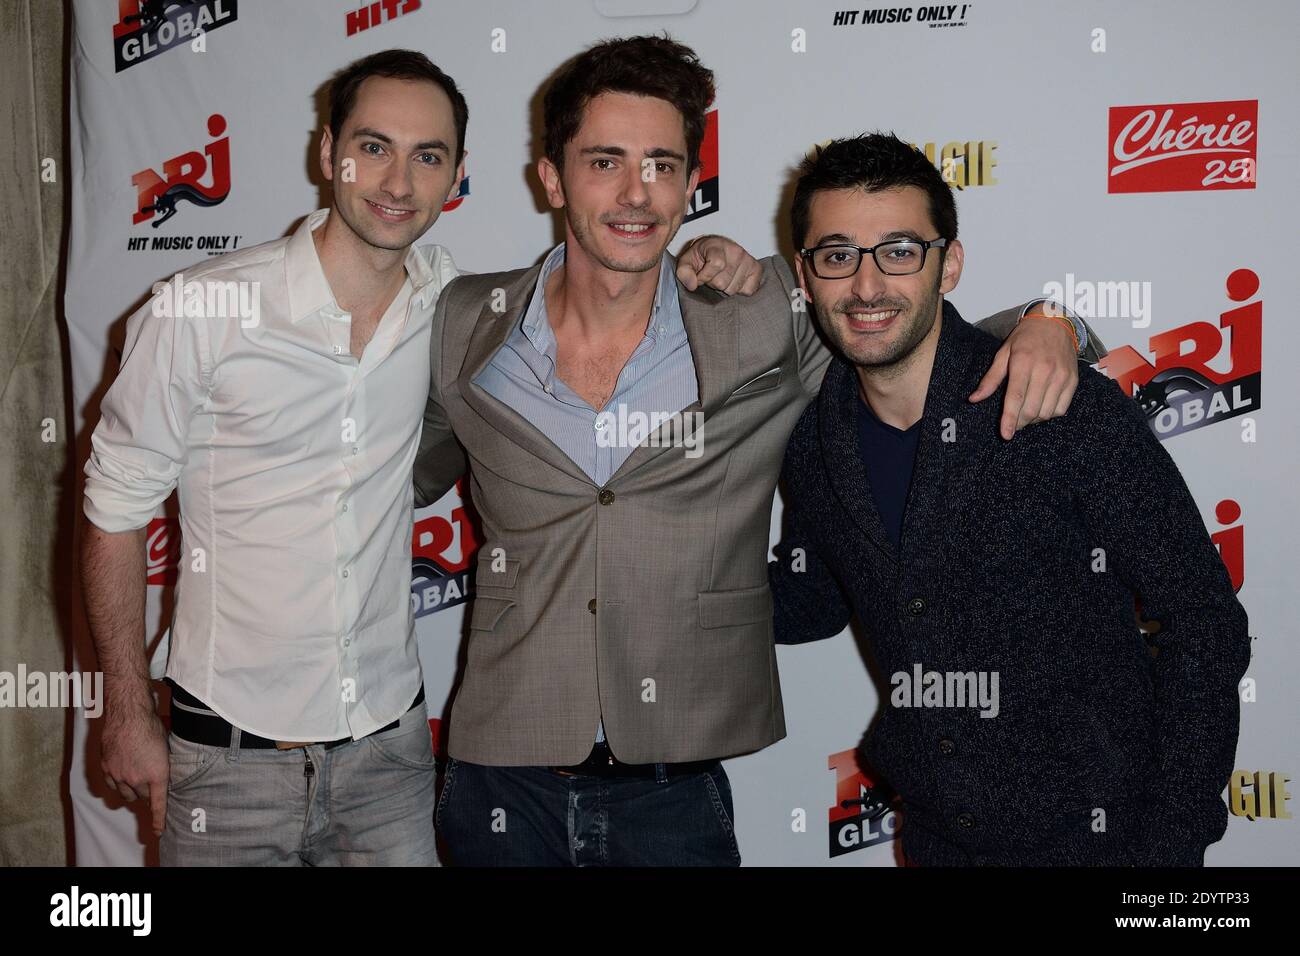 Julien Seeberger, Guillaume Pley and Jean-Marc Nichanian attending the NRJ  Global annual press conference in Paris, France on September 17, 2013.  Photo by Nicolas Briquet/ABACAPRESS.COM Stock Photo - Alamy